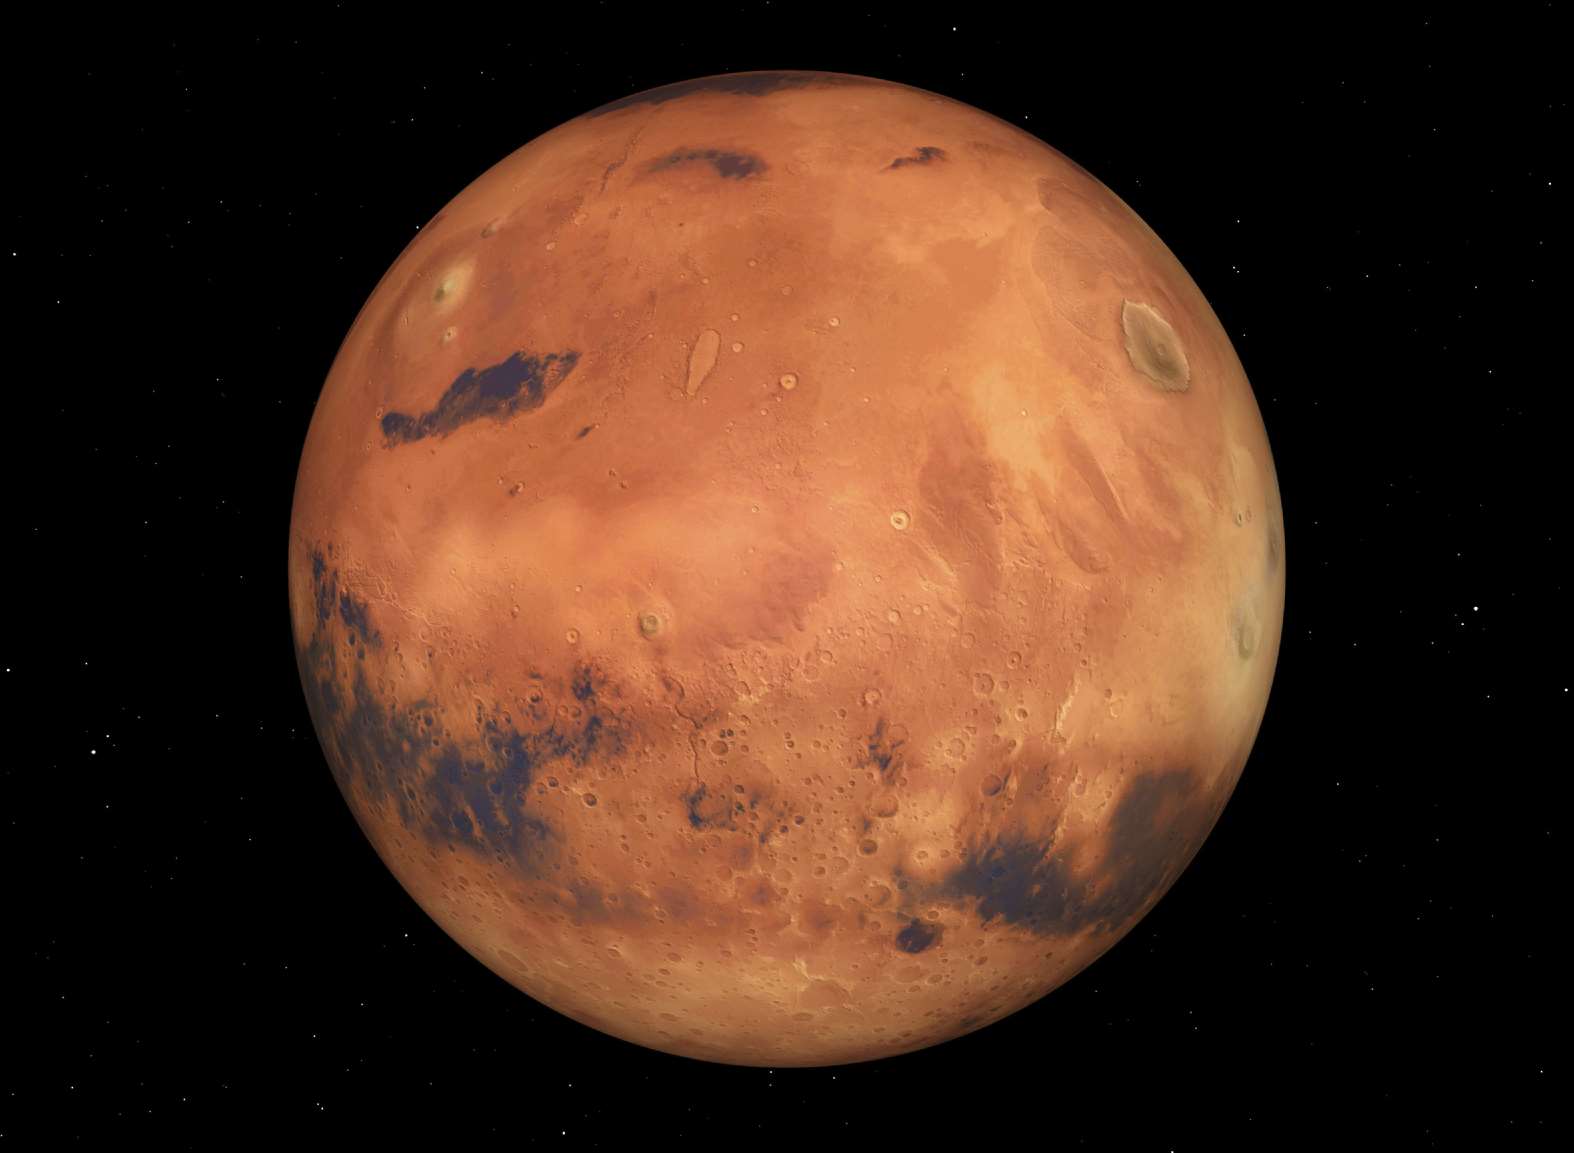 Mars will be the closest its been to Earth for 11 years